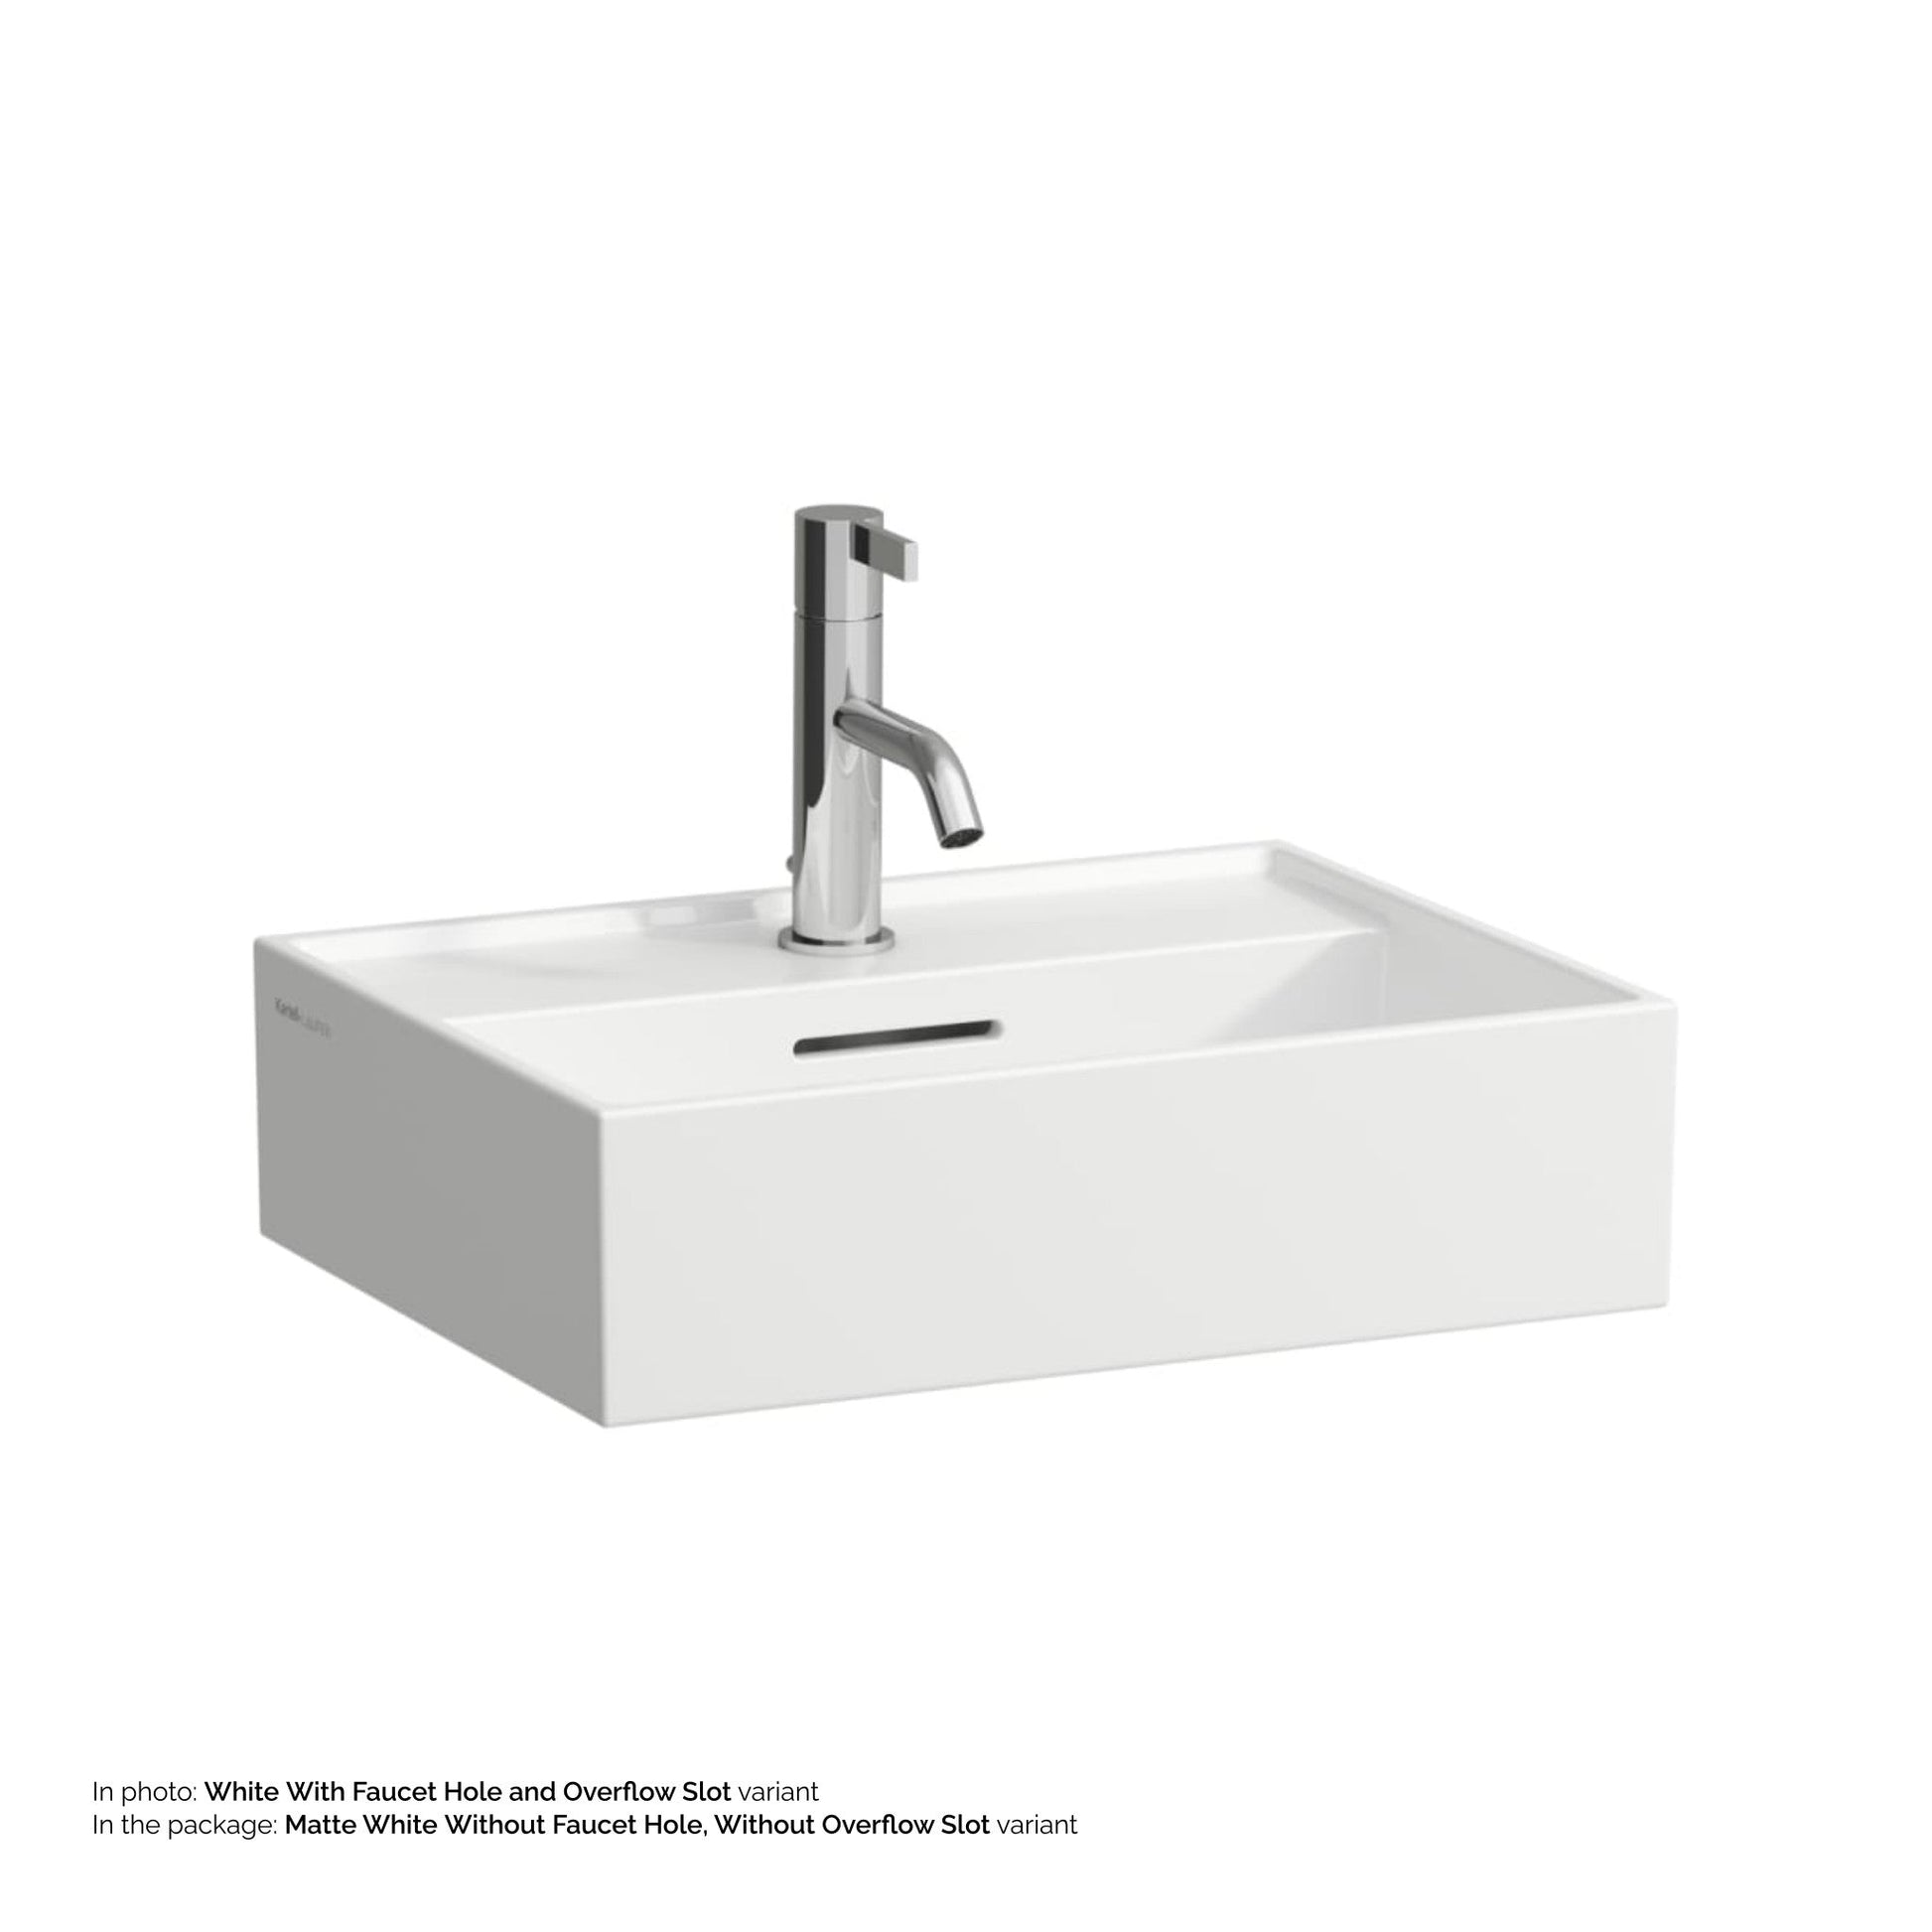 Laufen Kartell 18" x 13" Matte White Wall-Mounted Bathroom Sink Without Faucet Hole